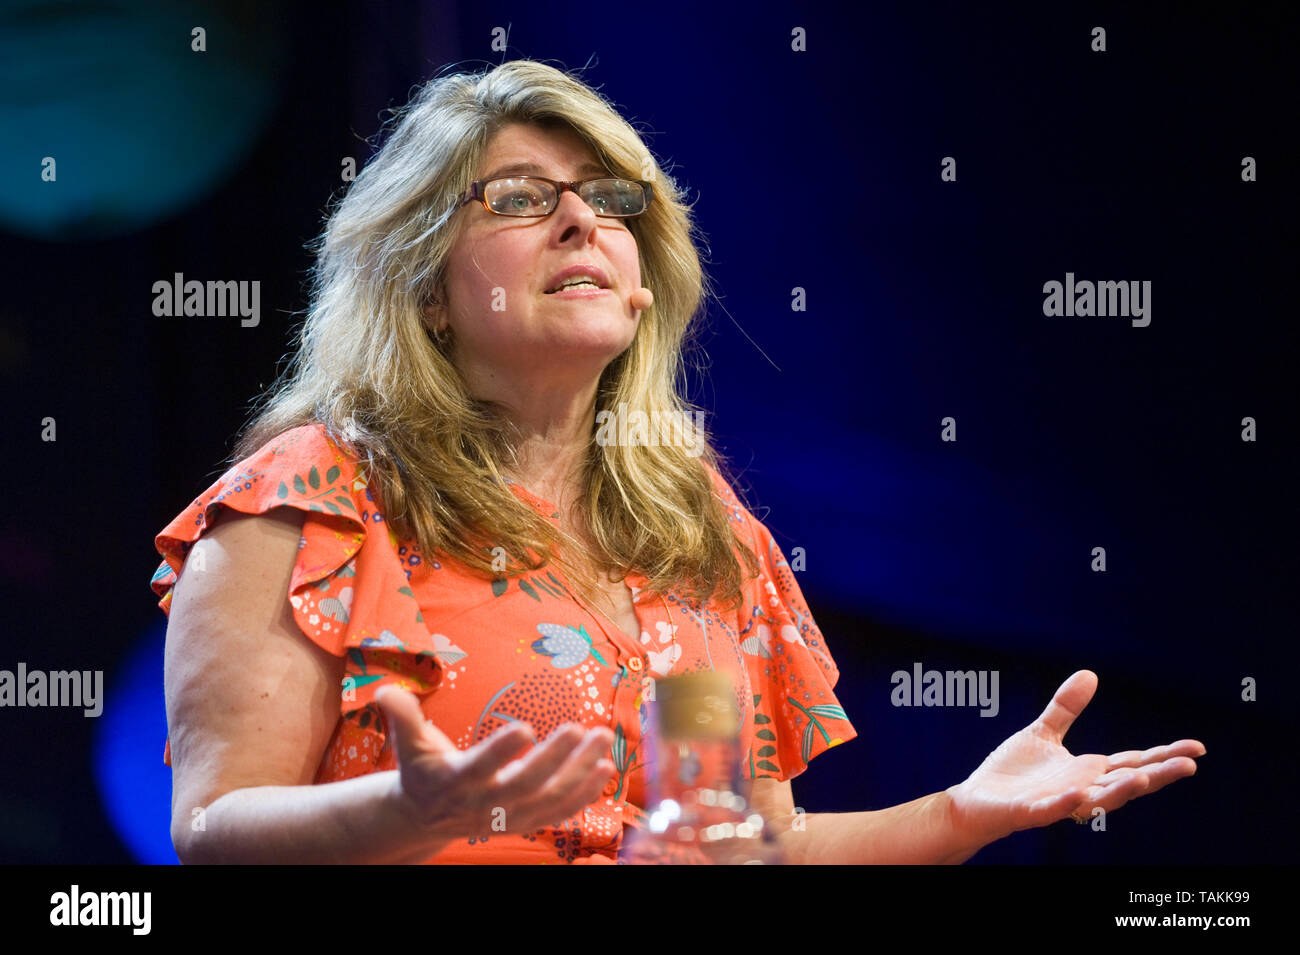 Naomi Wolf American feminist academic author writer and former political advisor speaking on stage at Hay Festival Hay-on-Wye Powys Wales UK Stock Photo